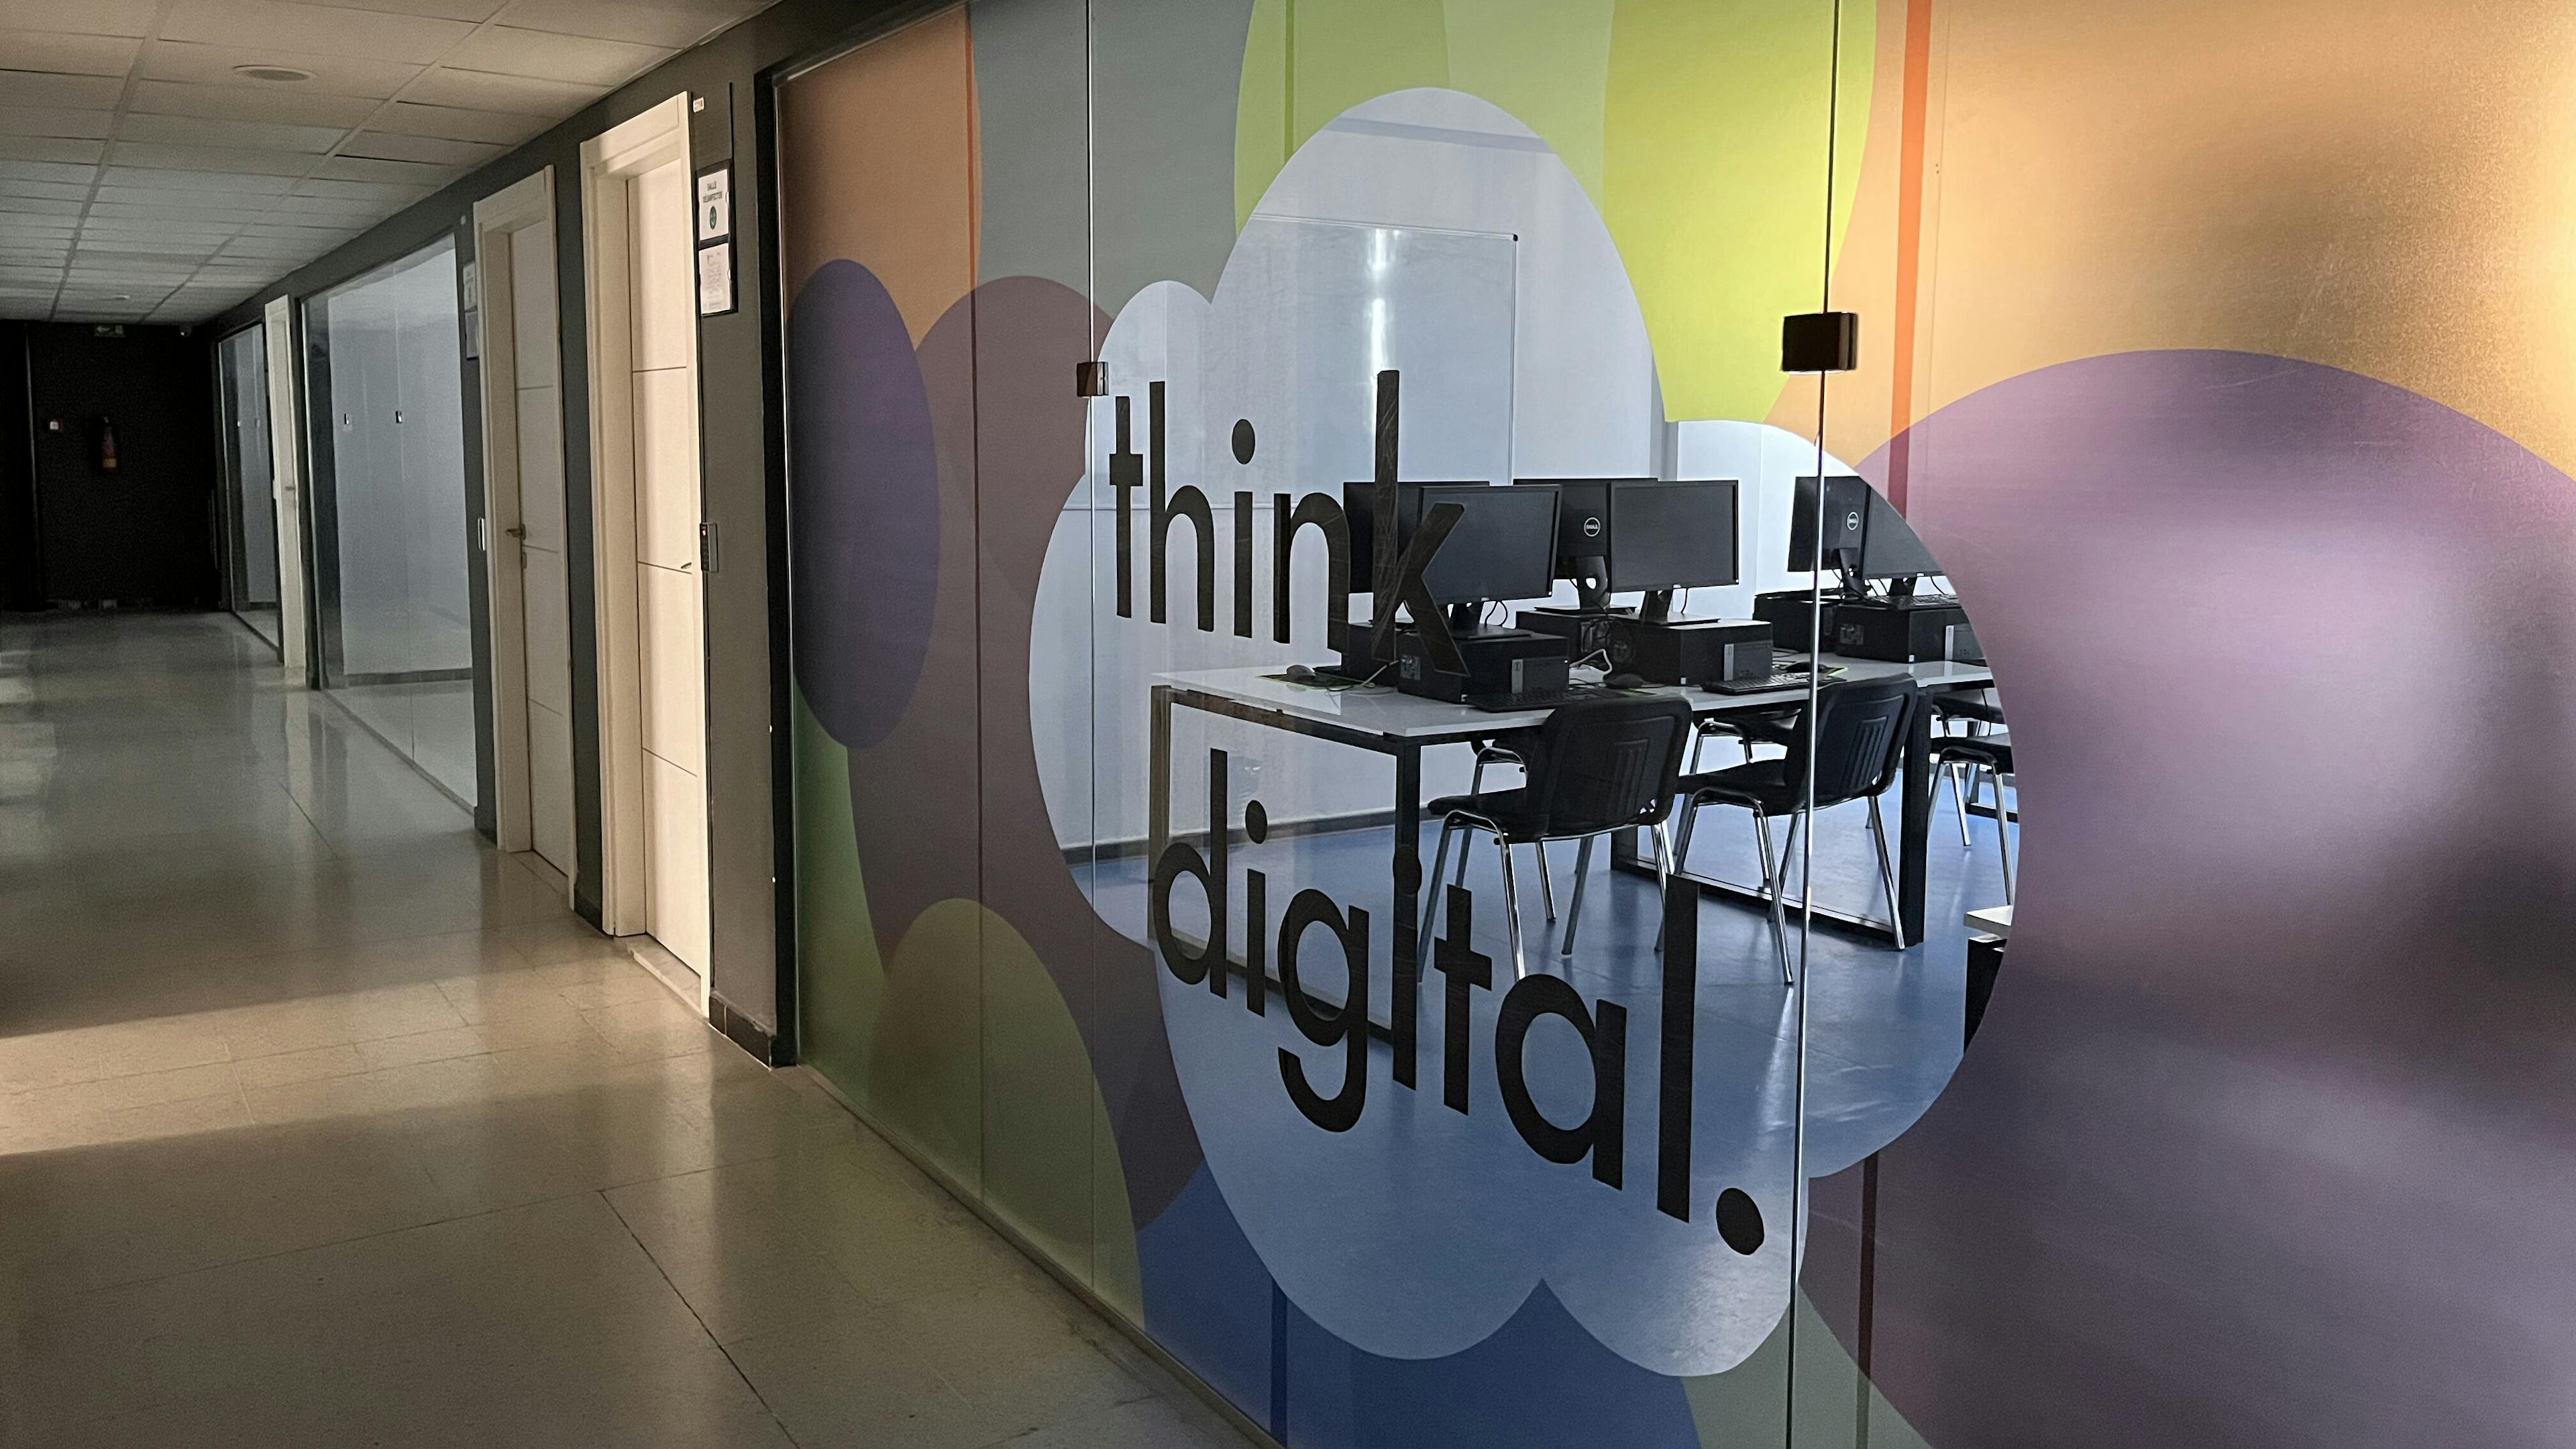 Corporate Office Hallway with Digital Theme